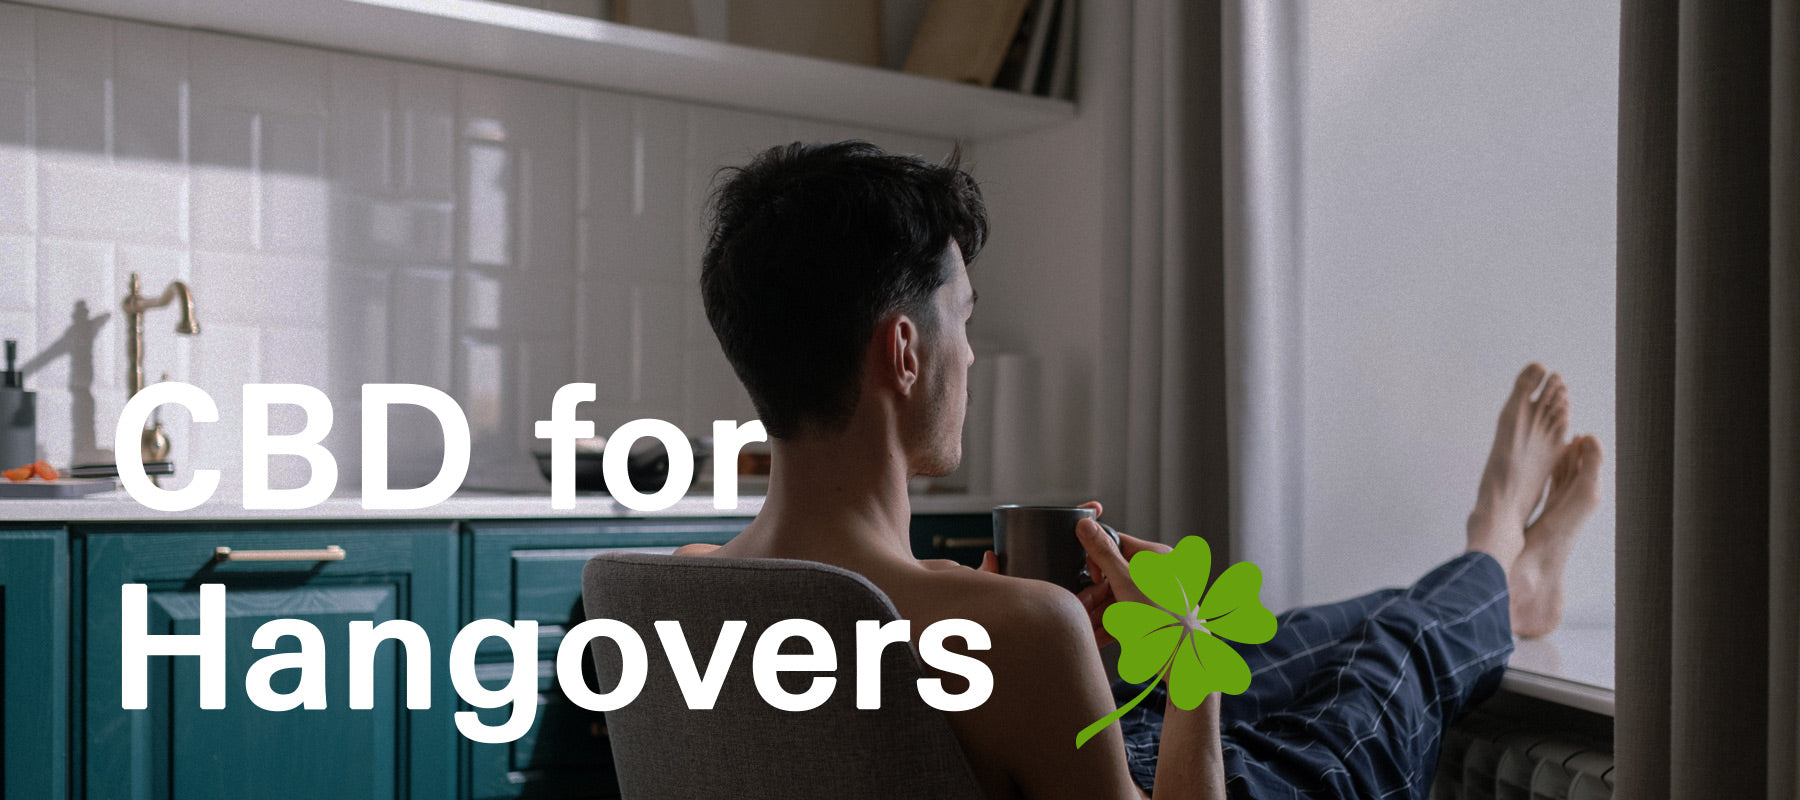 CBD for Hangovers (Happy St. Patrick’s Day!)